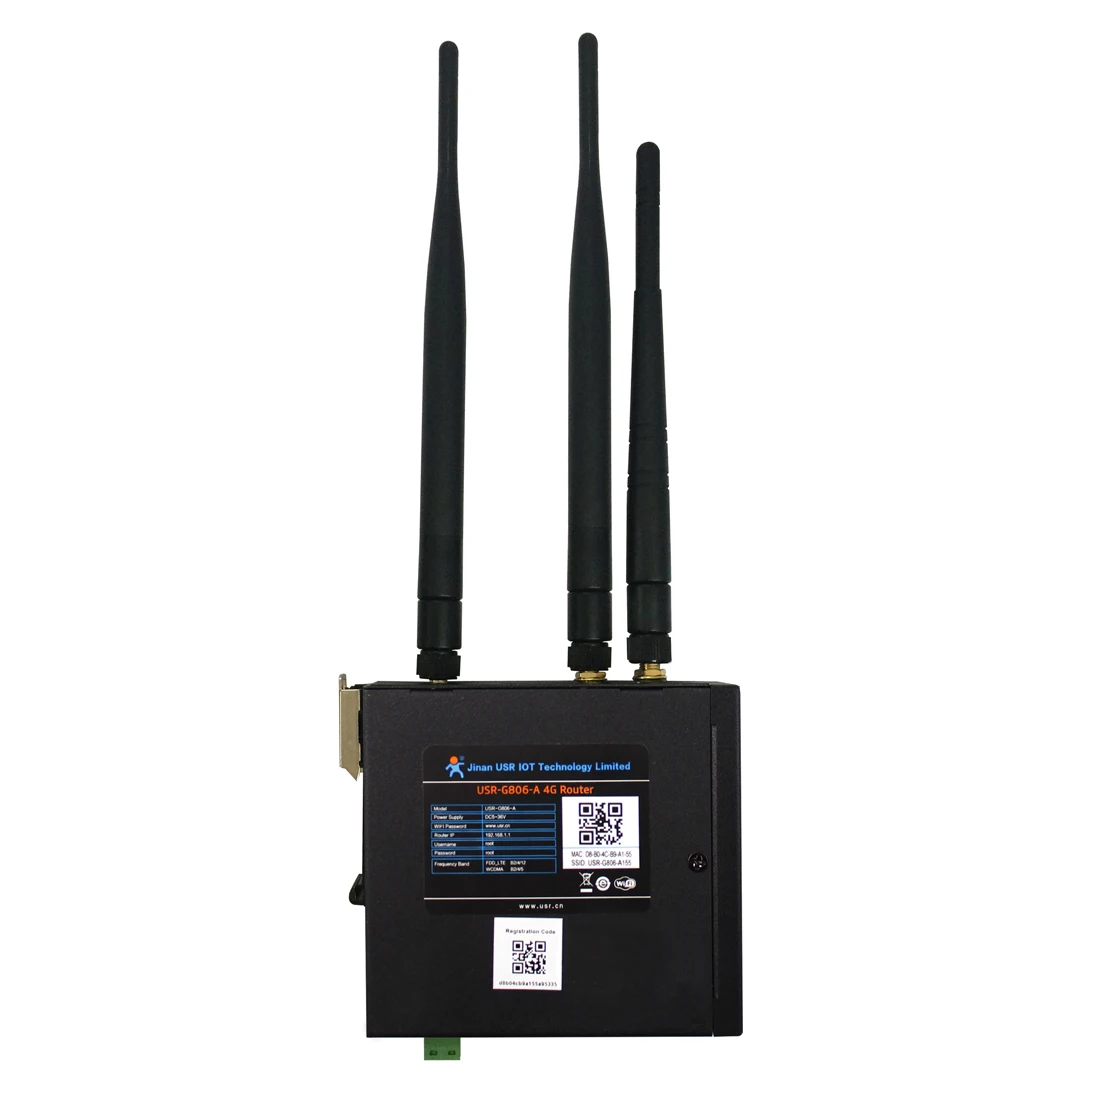 USR-G806 Industrial 3G/4G Wireless Routers Support SIM Card Slot with APN VPN 